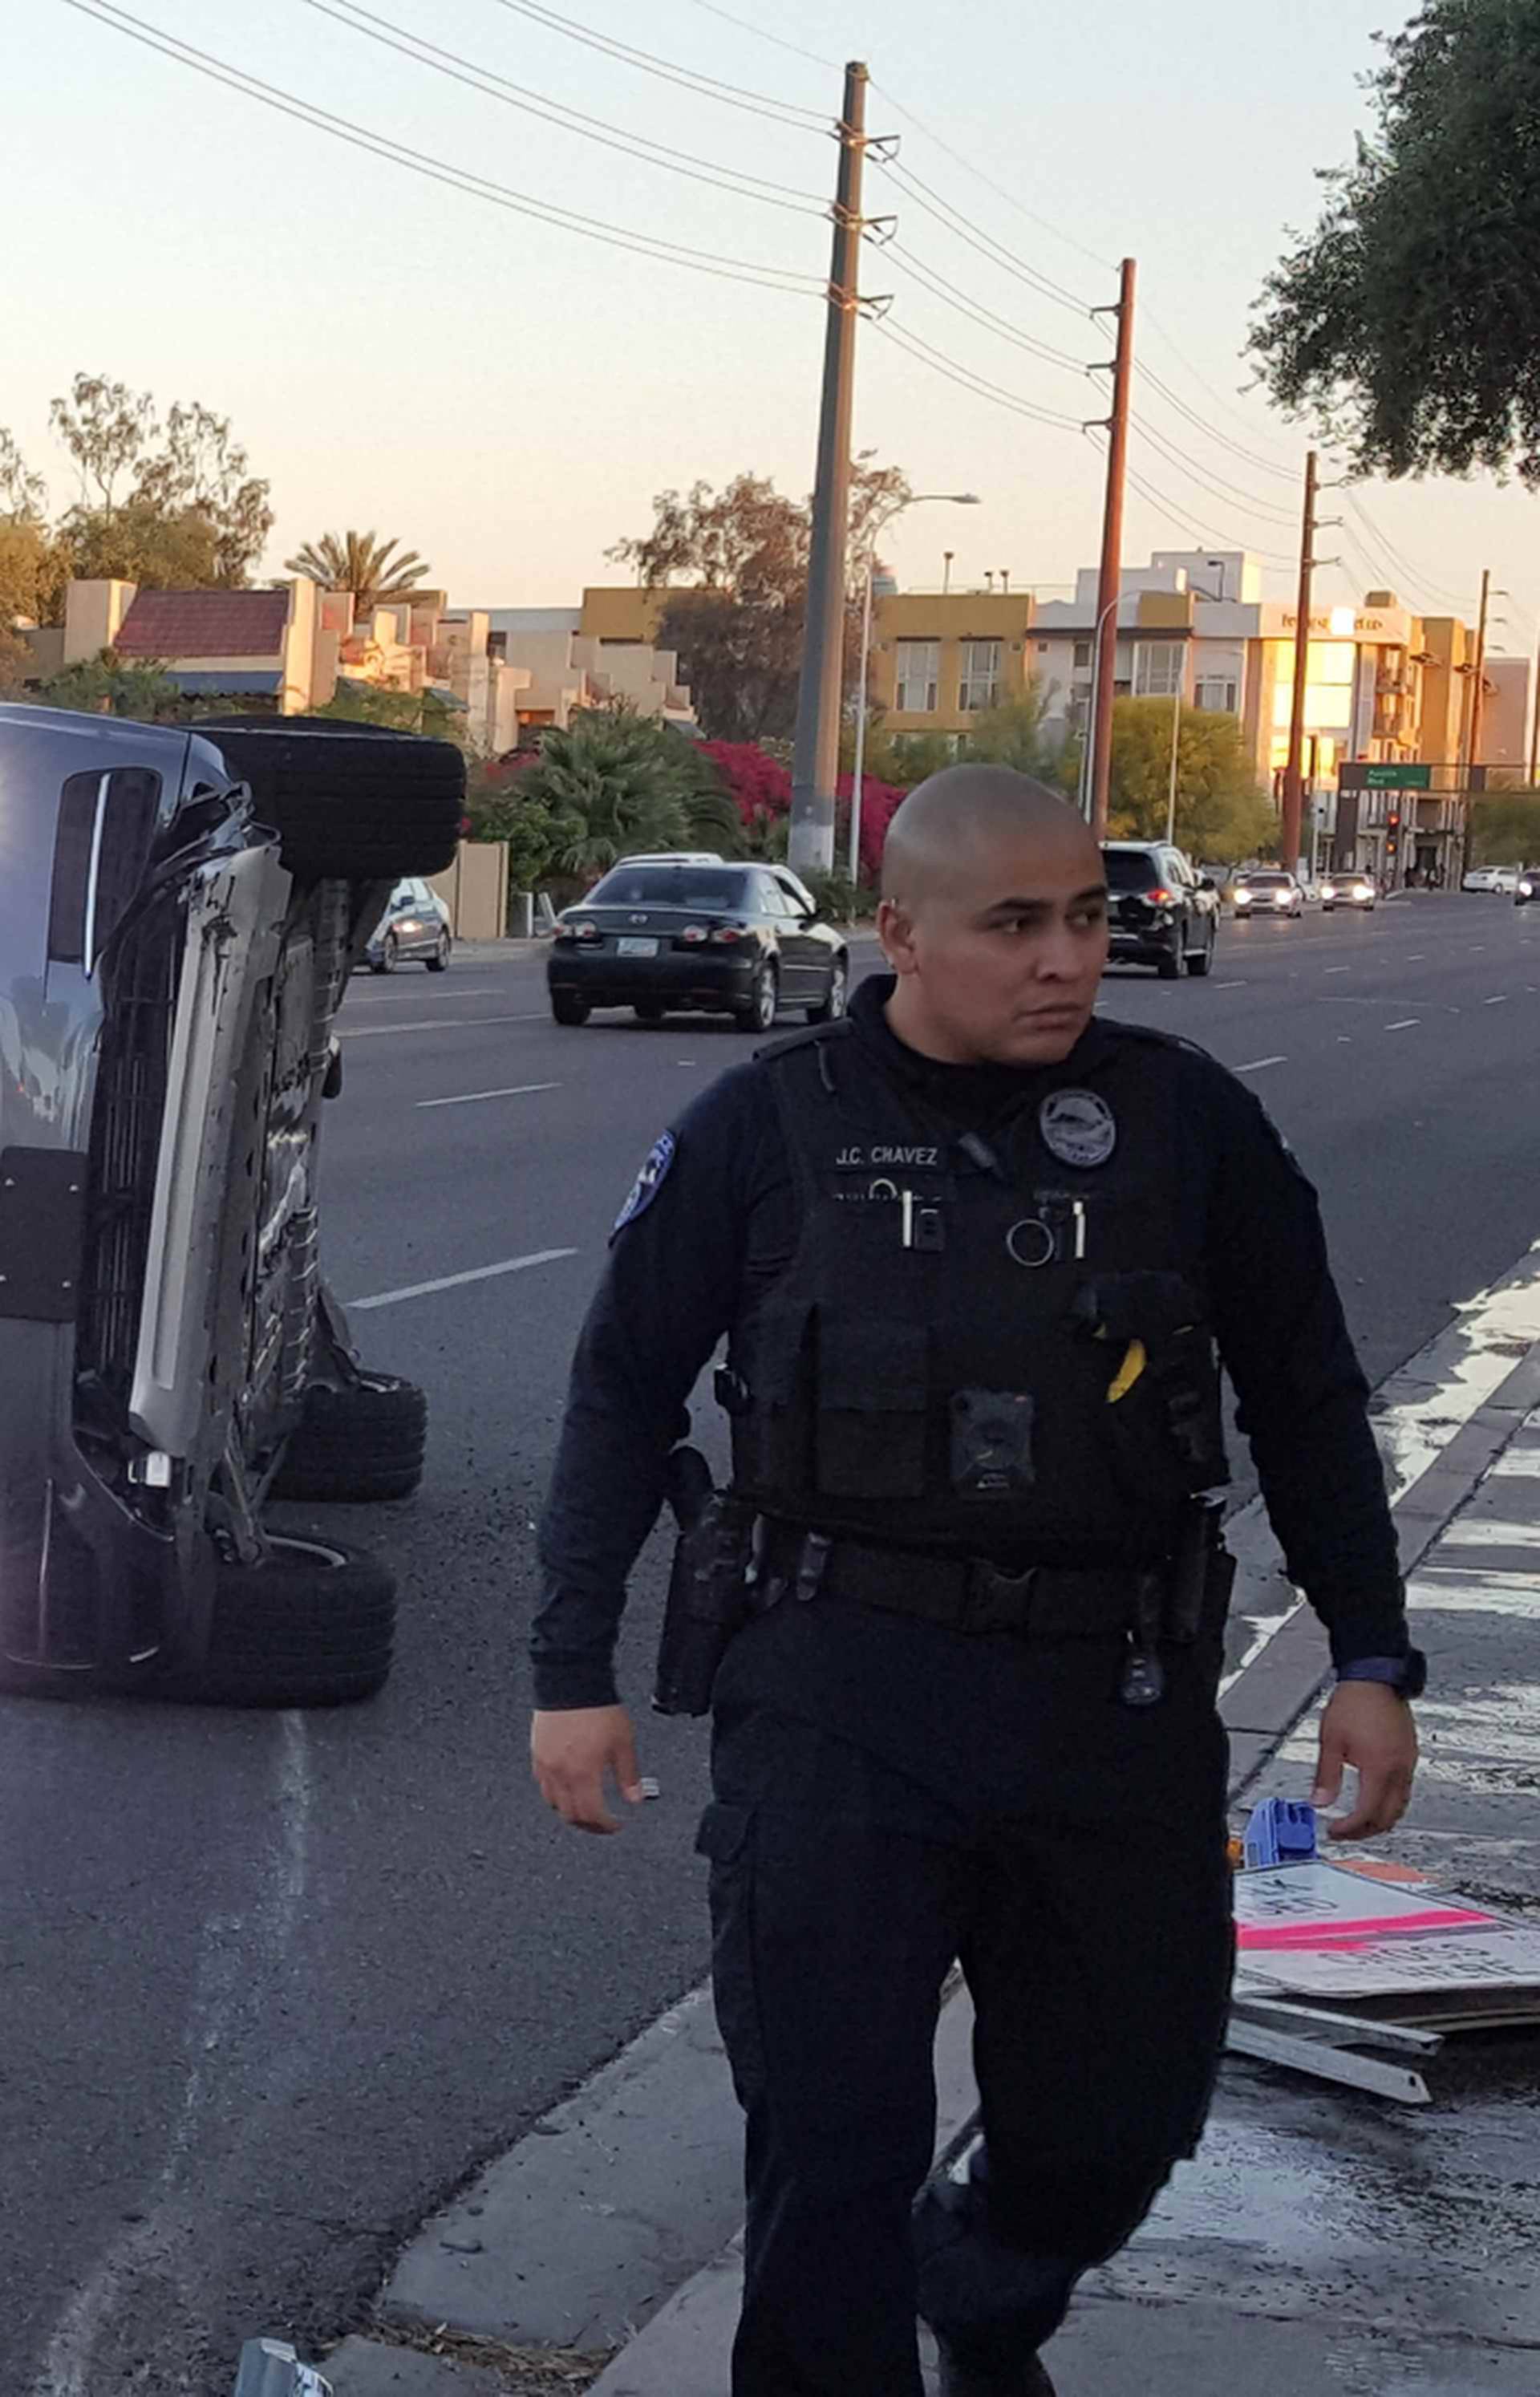 A self-driven Volvo SUV owned and operated by Uber Technologies Inc. is flipped on its side after a collision in Tempe